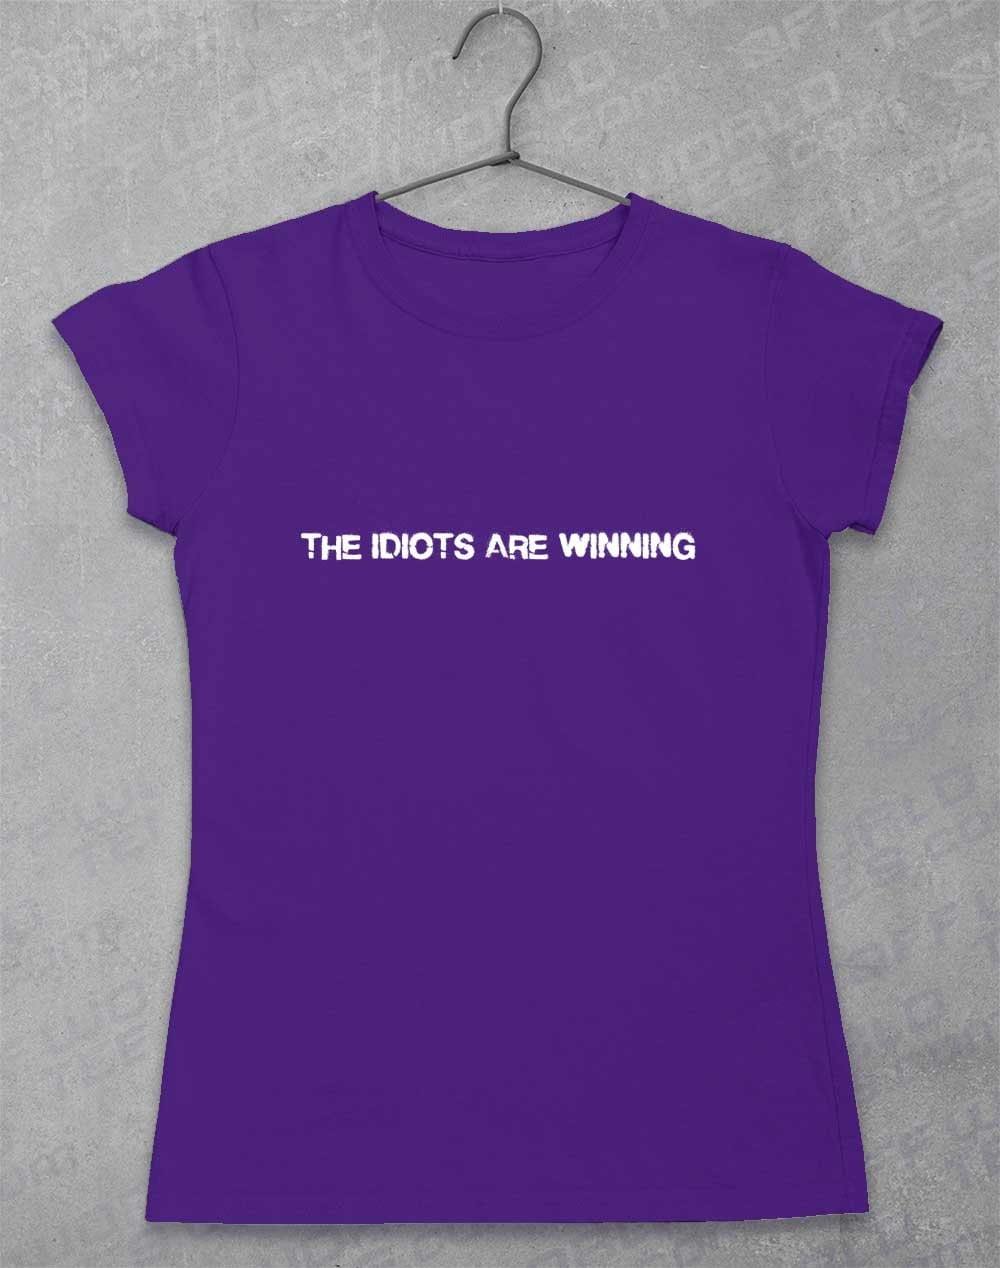 The Idiots Are Winning Womens T-Shirt 8-10 / Lilac  - Off World Tees